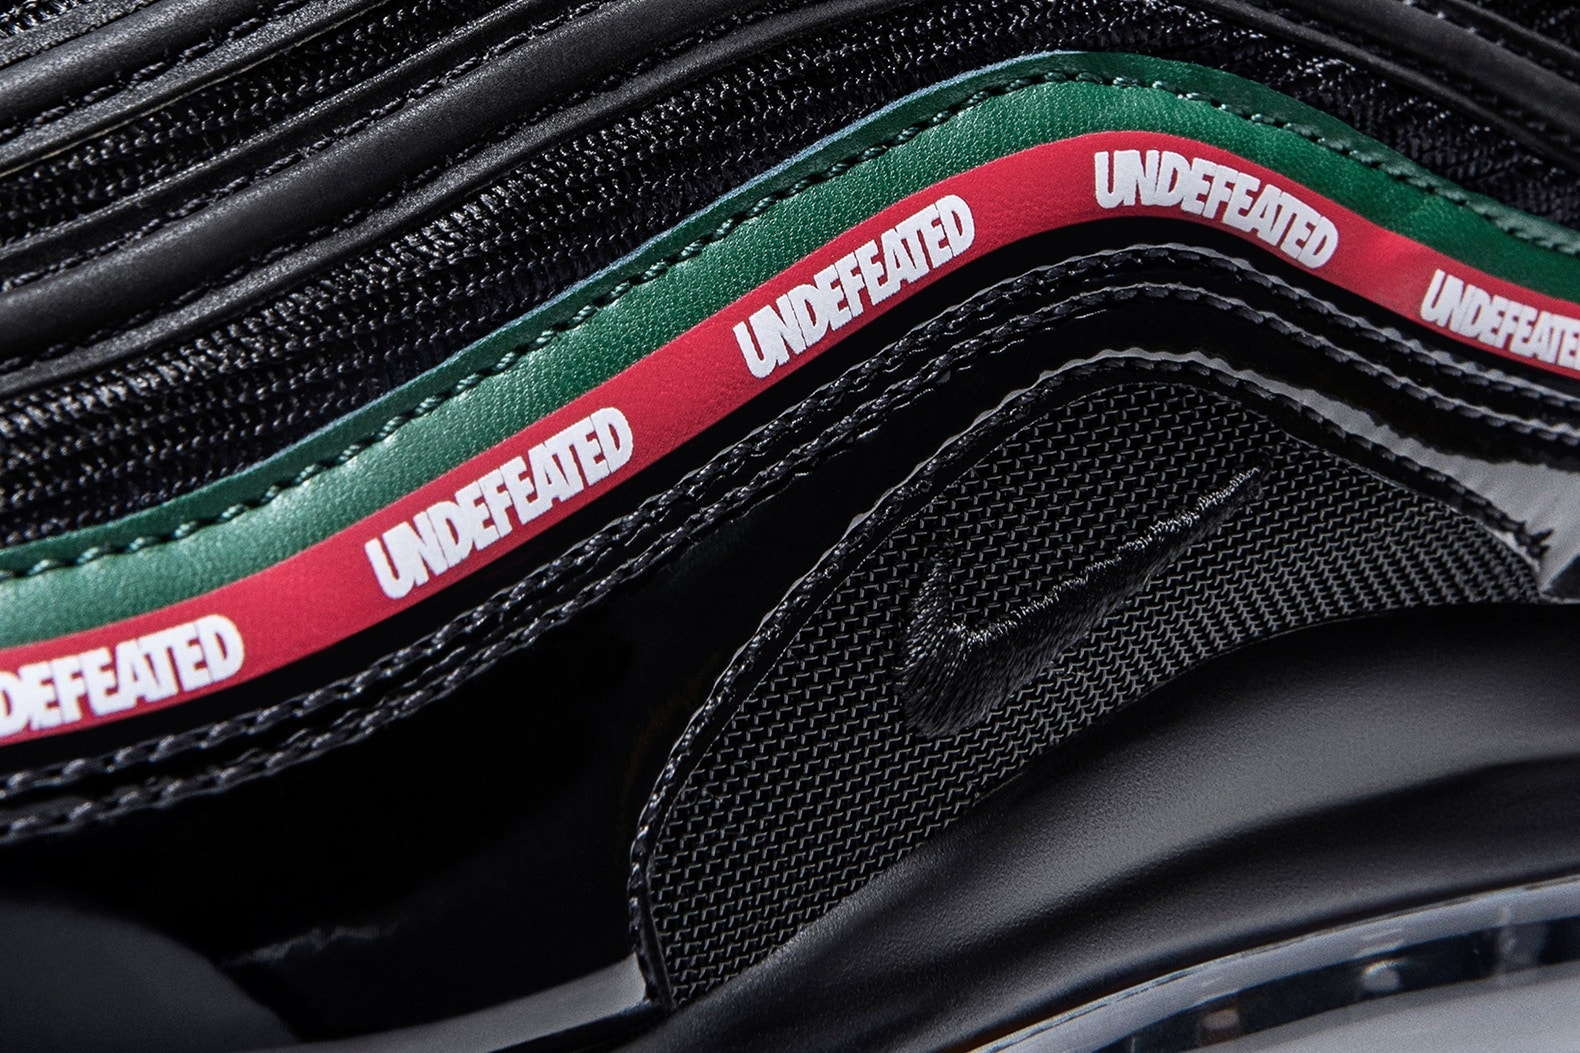 UNDEFEATED x Nike Air Max 97 OG 官方發售信息公開